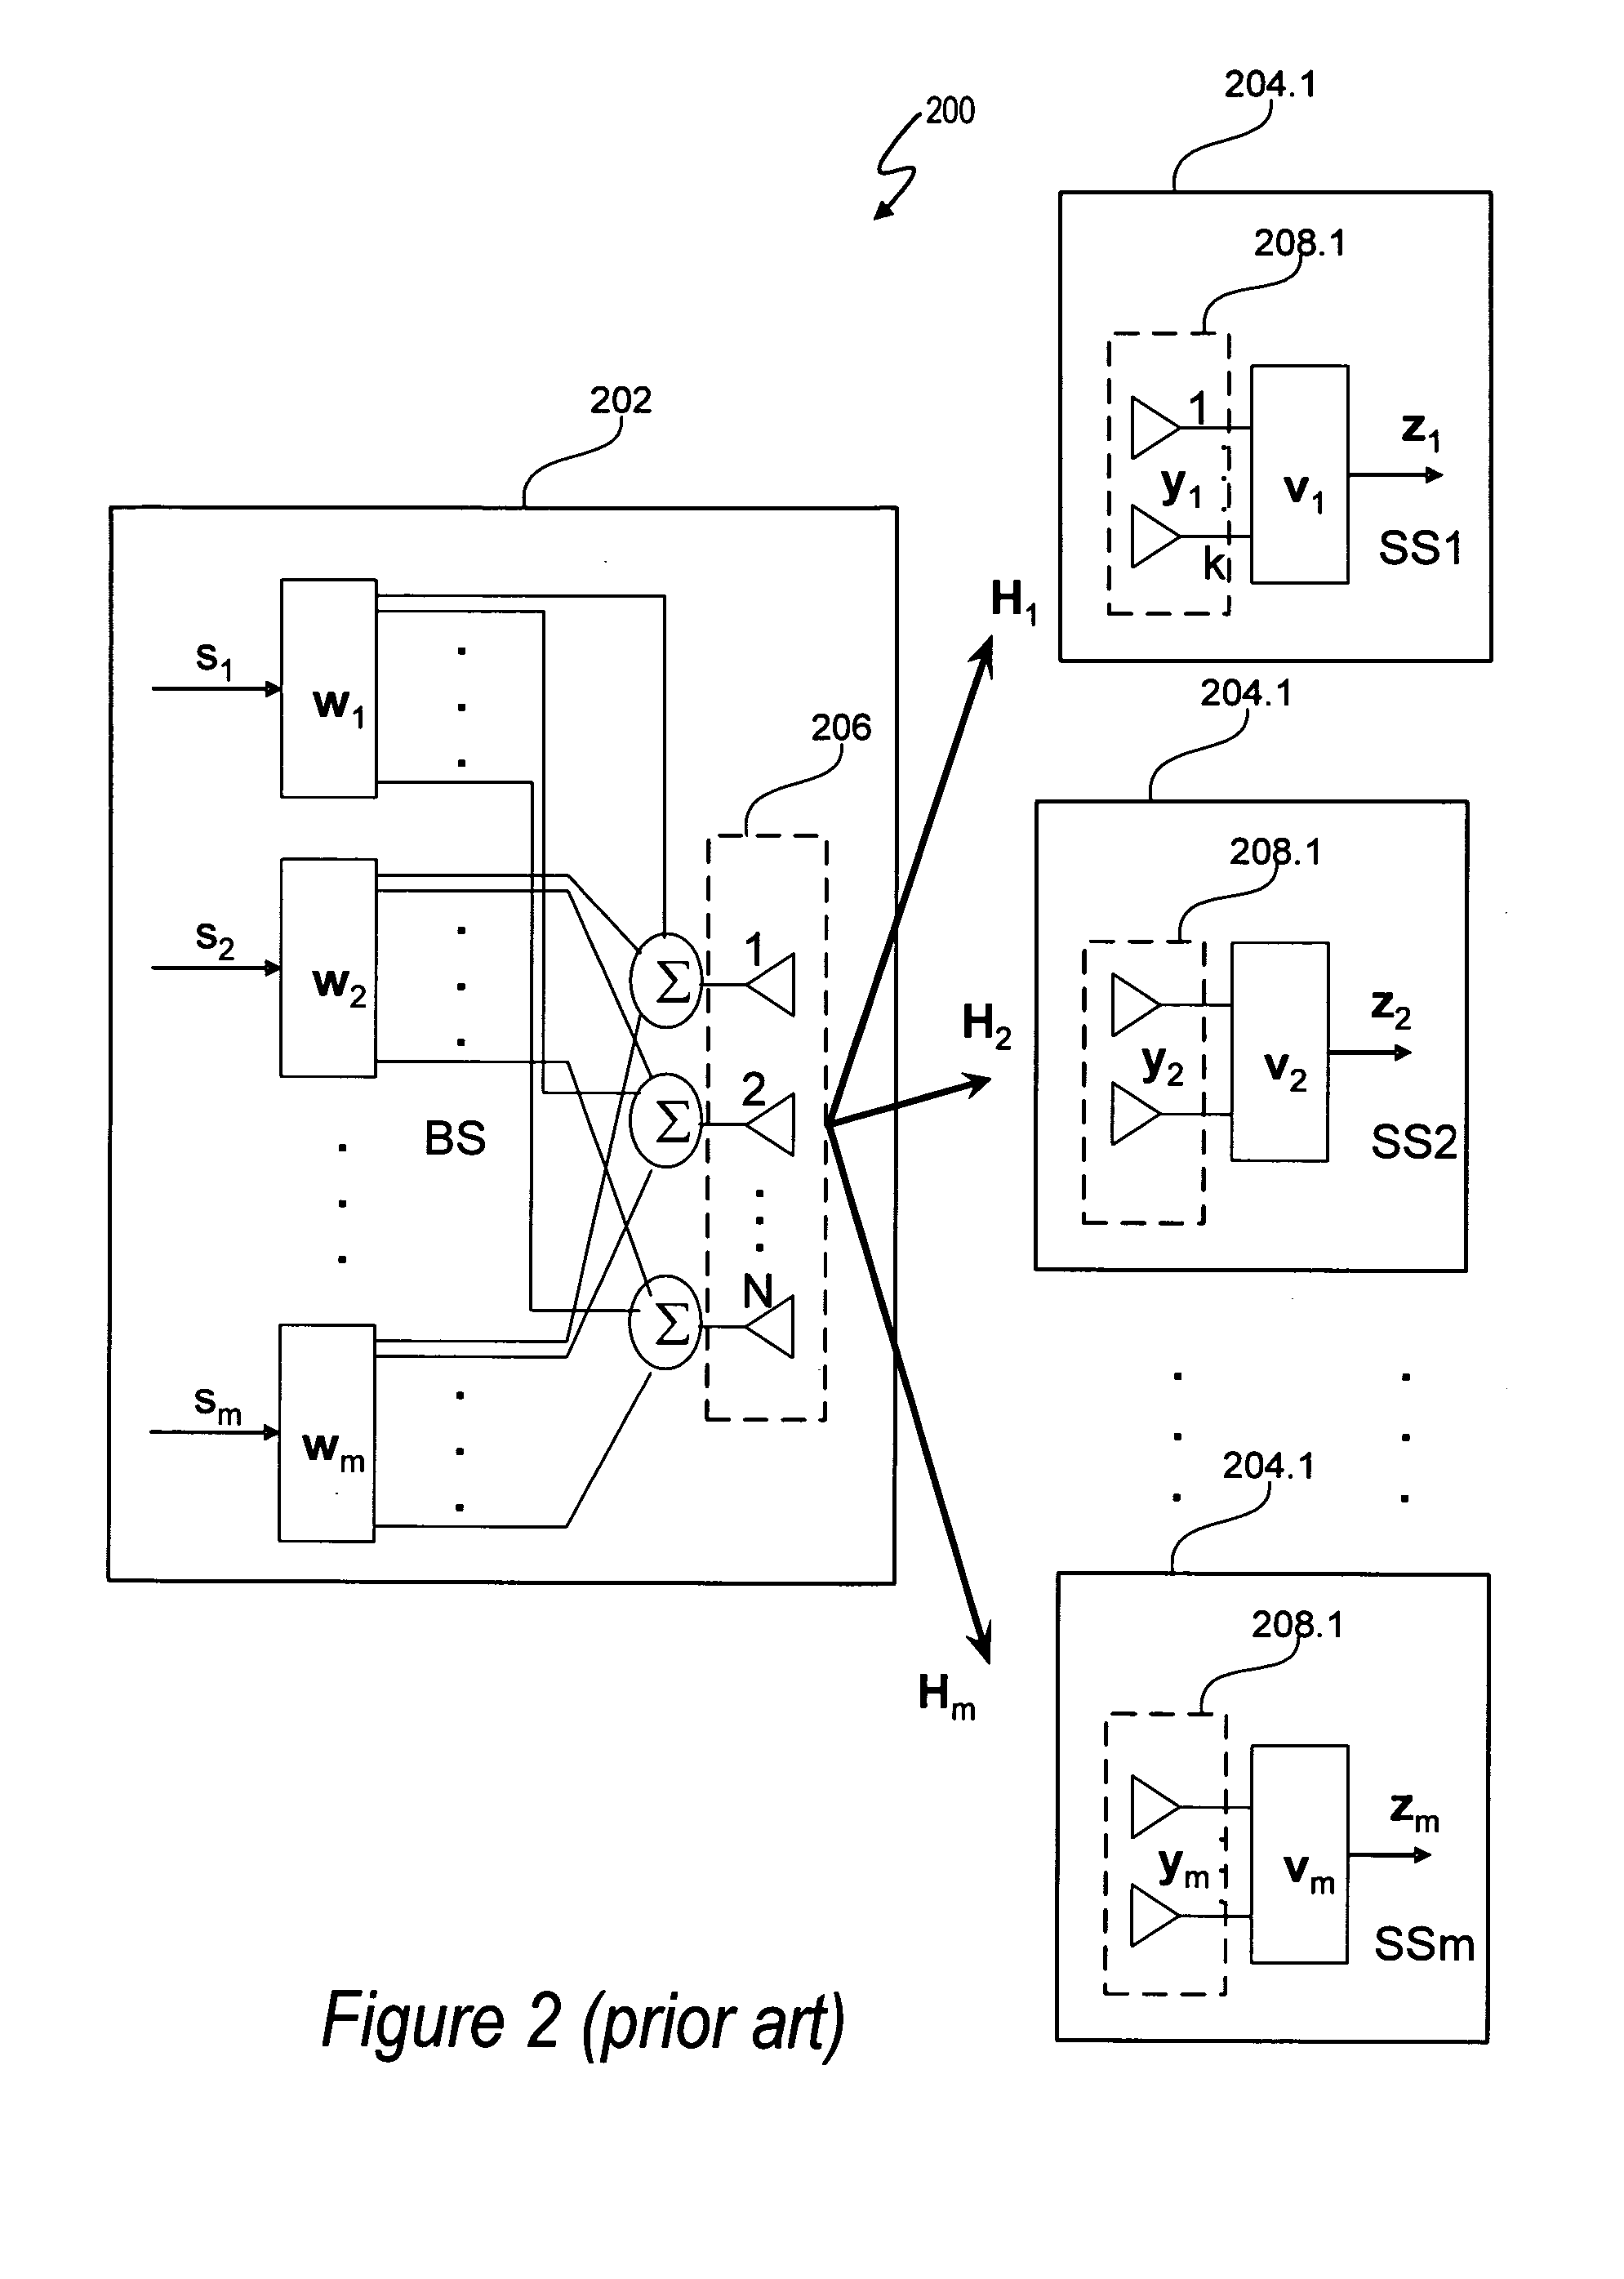 Beamforming for non-collaborative, space division multiple access systems